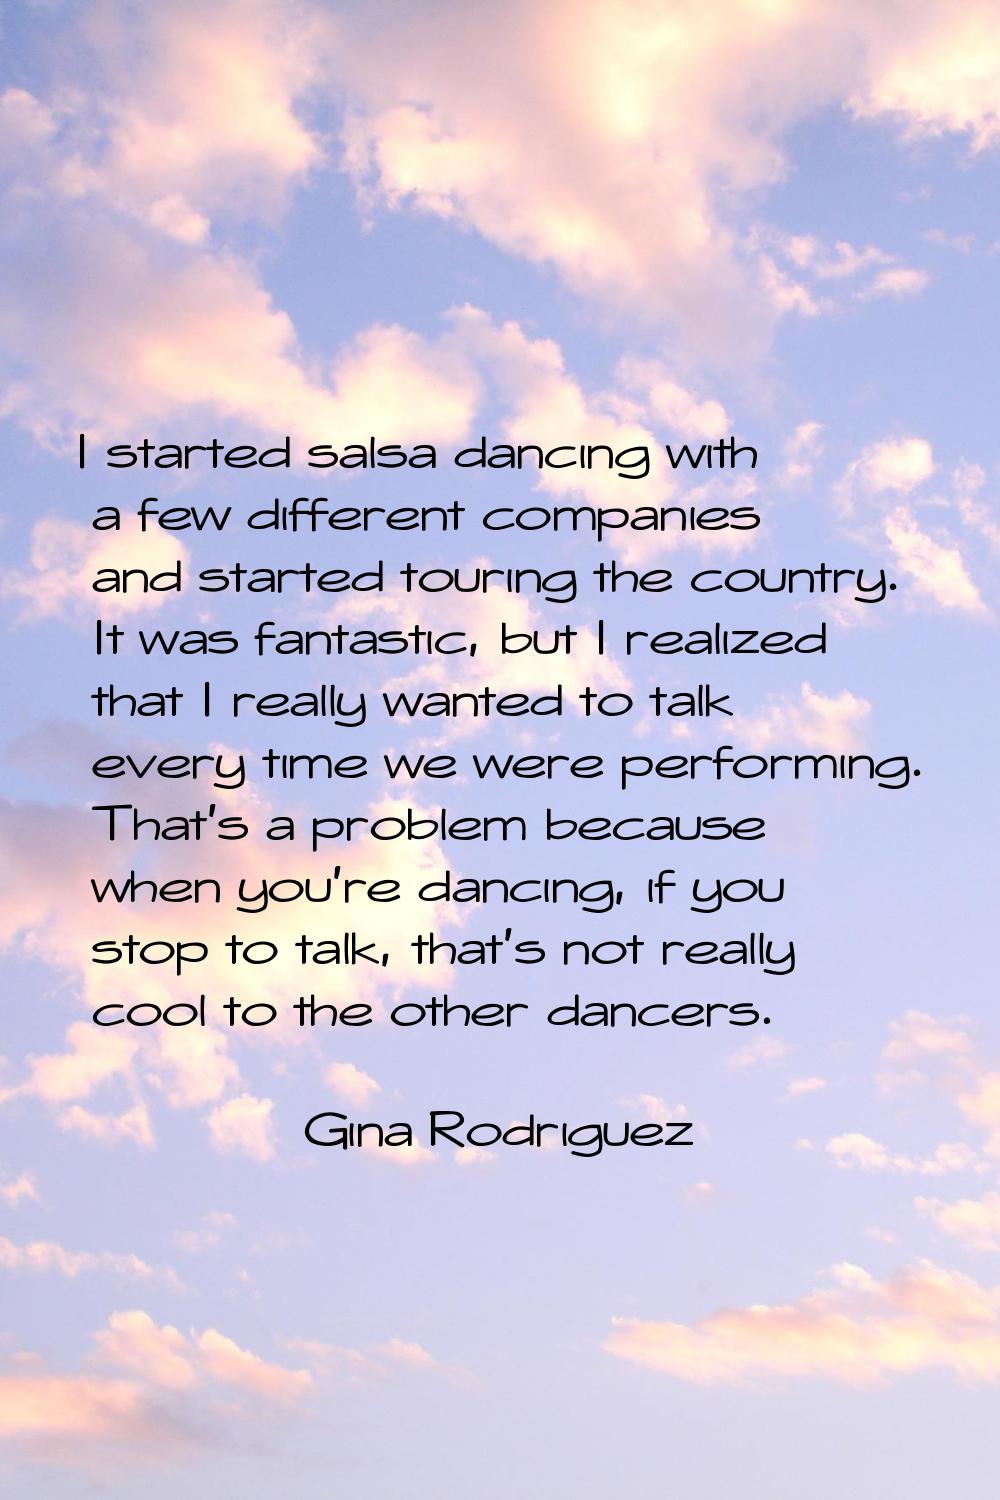 I started salsa dancing with a few different companies and started touring the country. It was fant